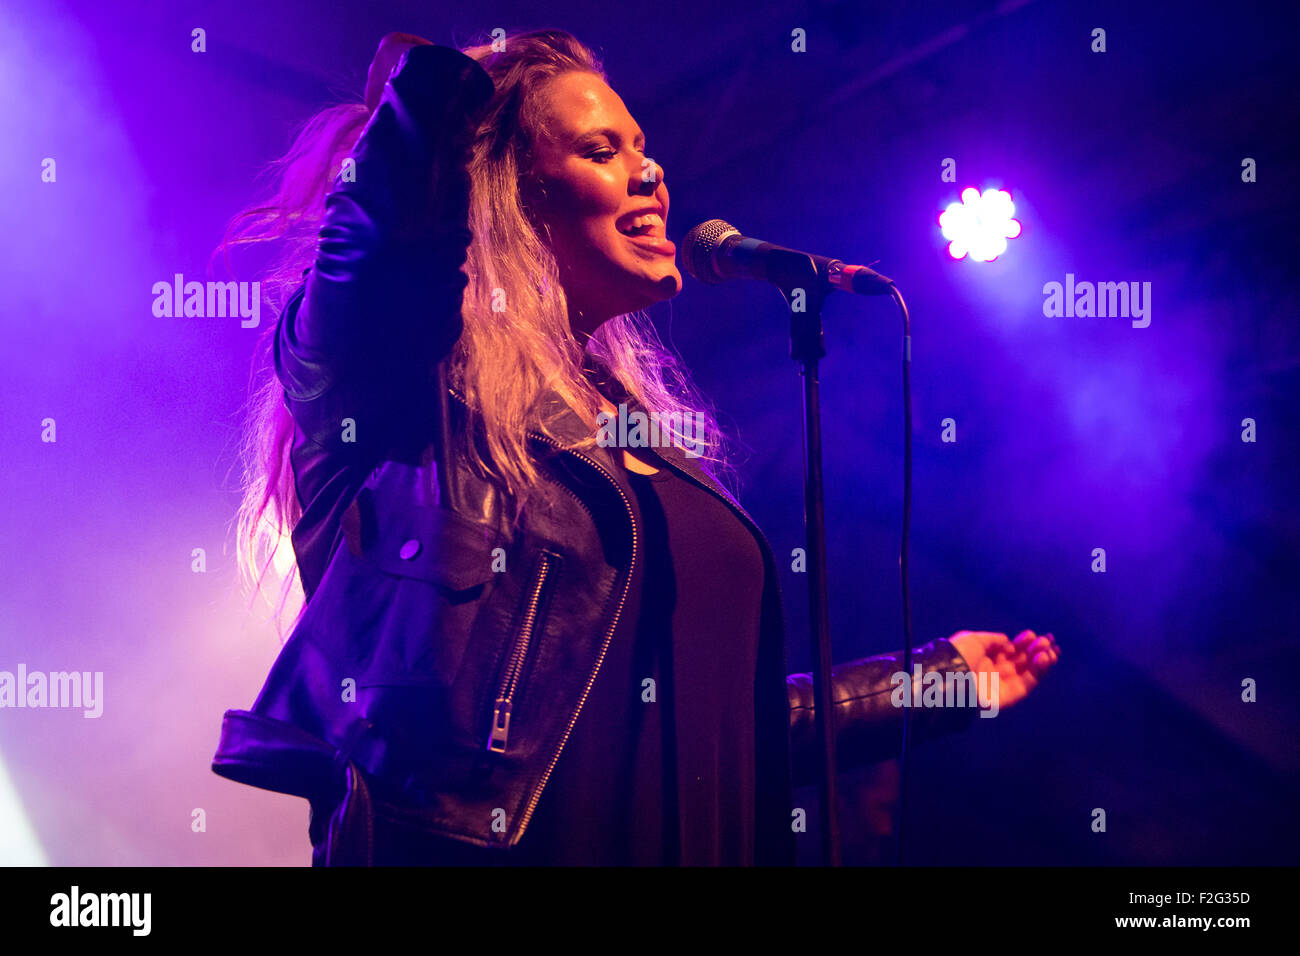 Milan Italy. 17th September 2015. The Australian singer GRACE performs live on stage at Circolo Magnolia opening the show of Leon Bridges Credit:  Rodolfo Sassano/Alamy Live News Stock Photo